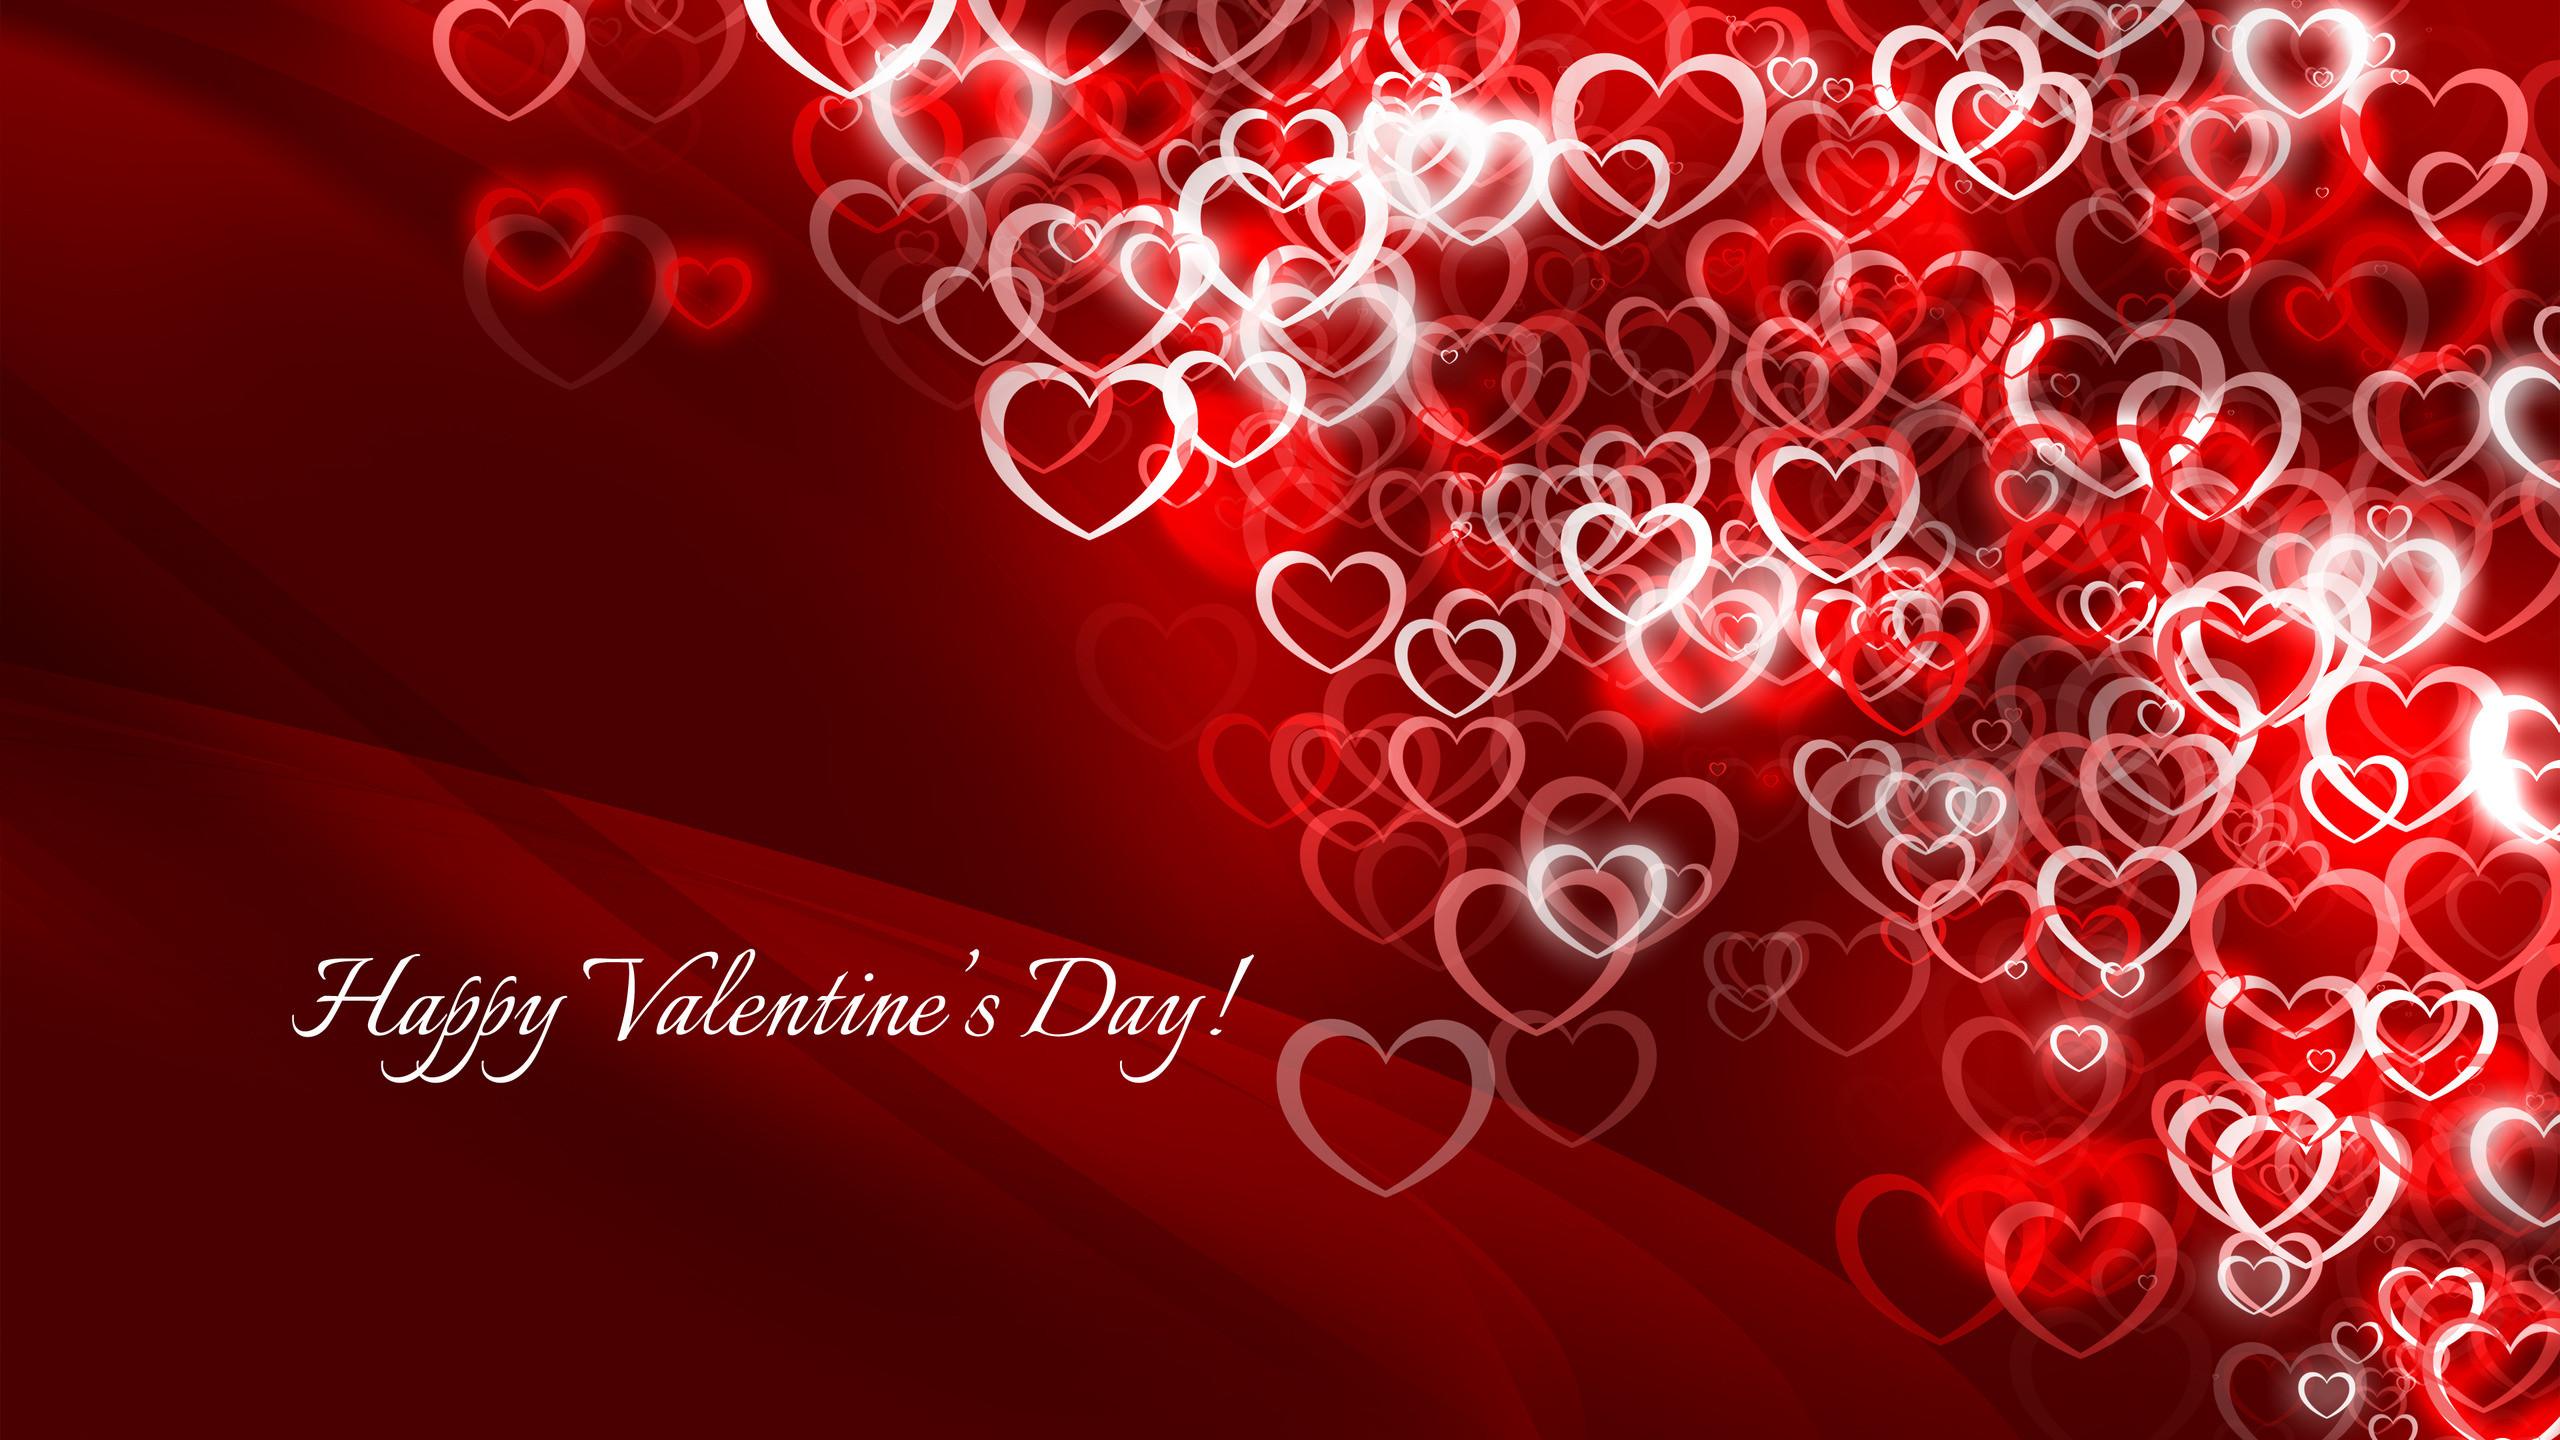 Valentines Day Wallpapers and Screensavers